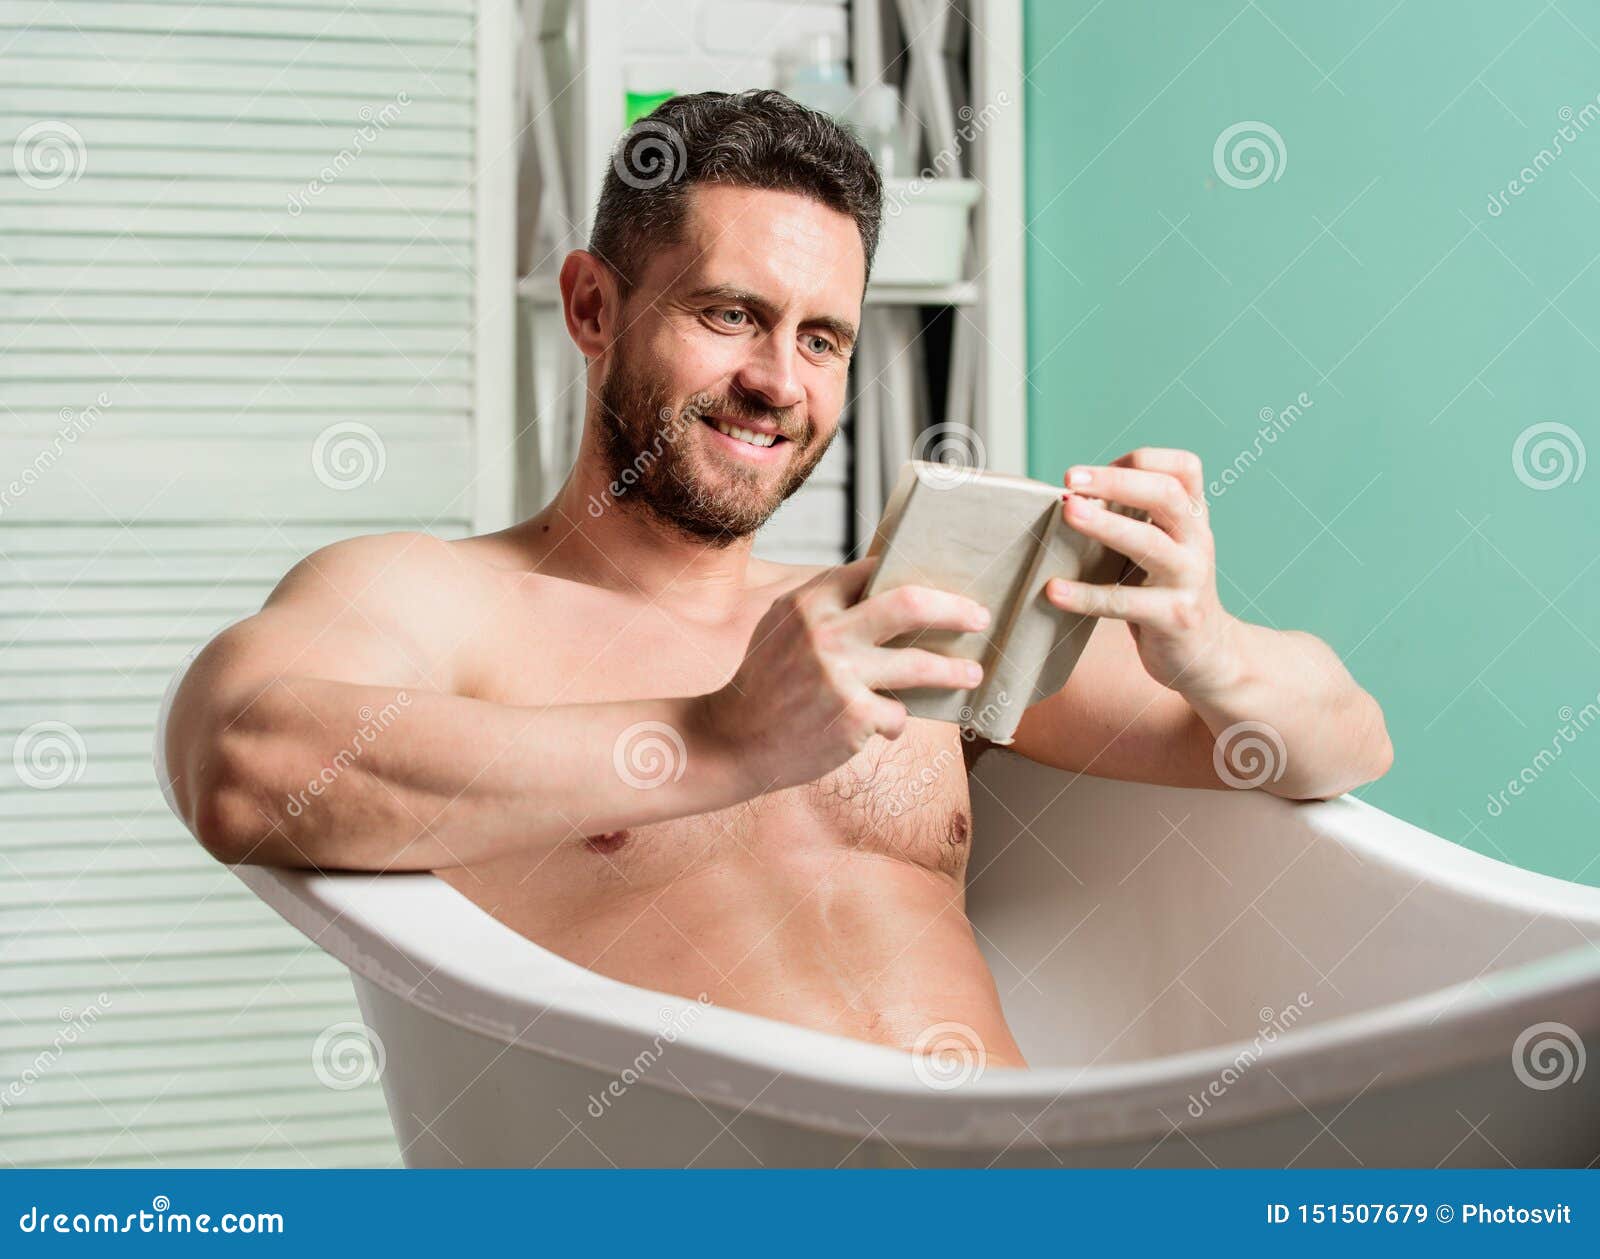 Man in Bathroom Reading. Macho Naked in Bathtub picture